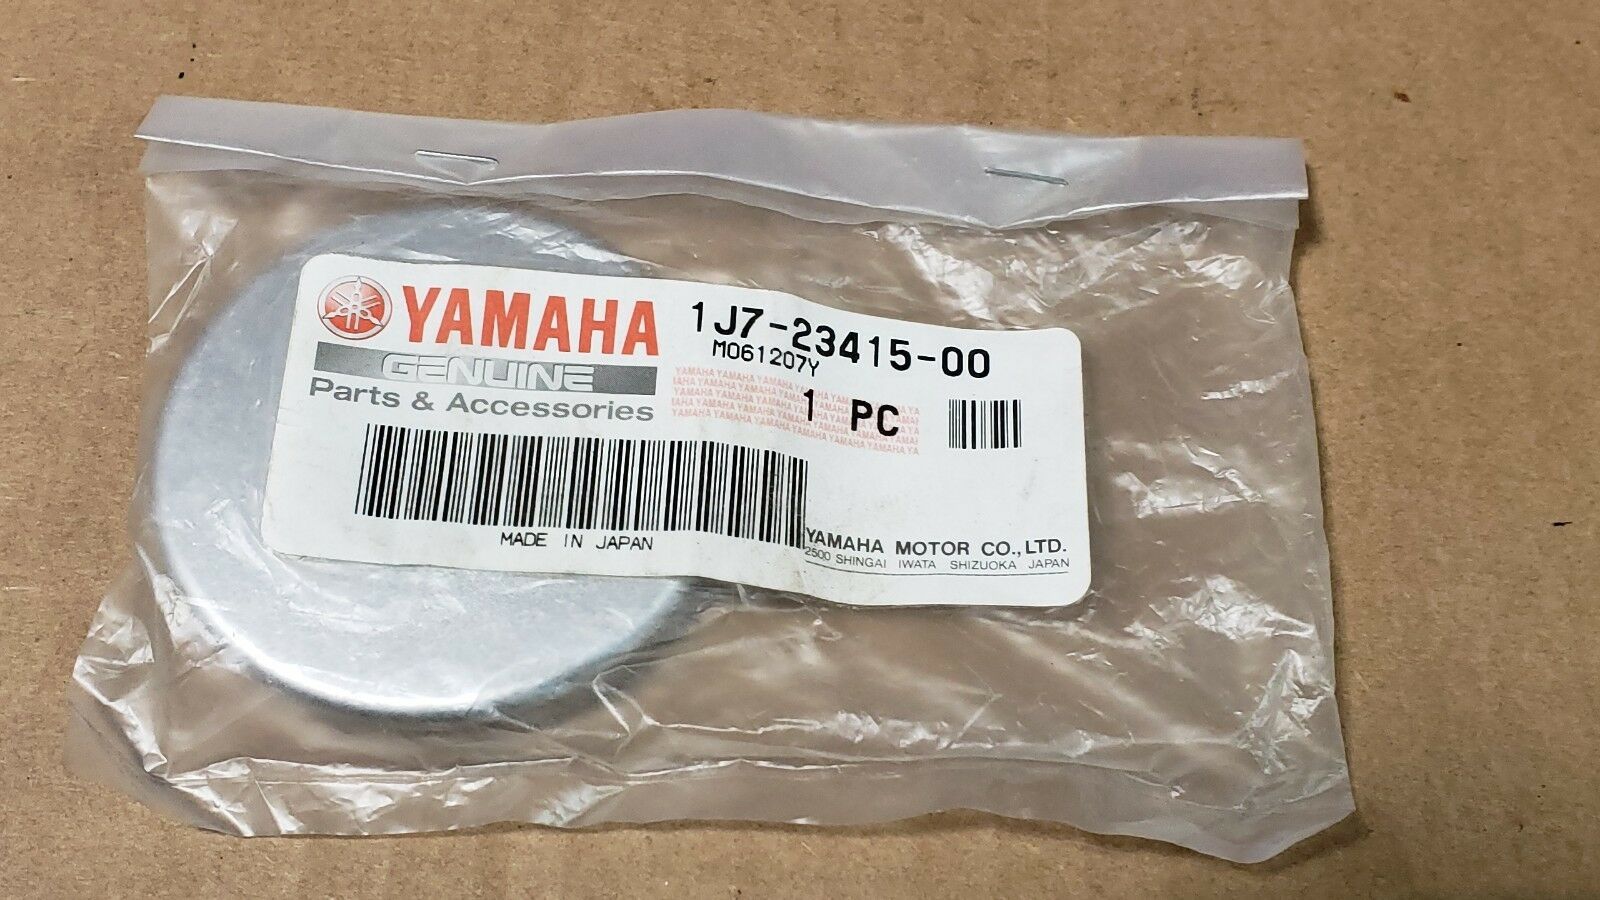 Primary image for OEM Yamaha Ball Race Cover, 1J7-23415-00